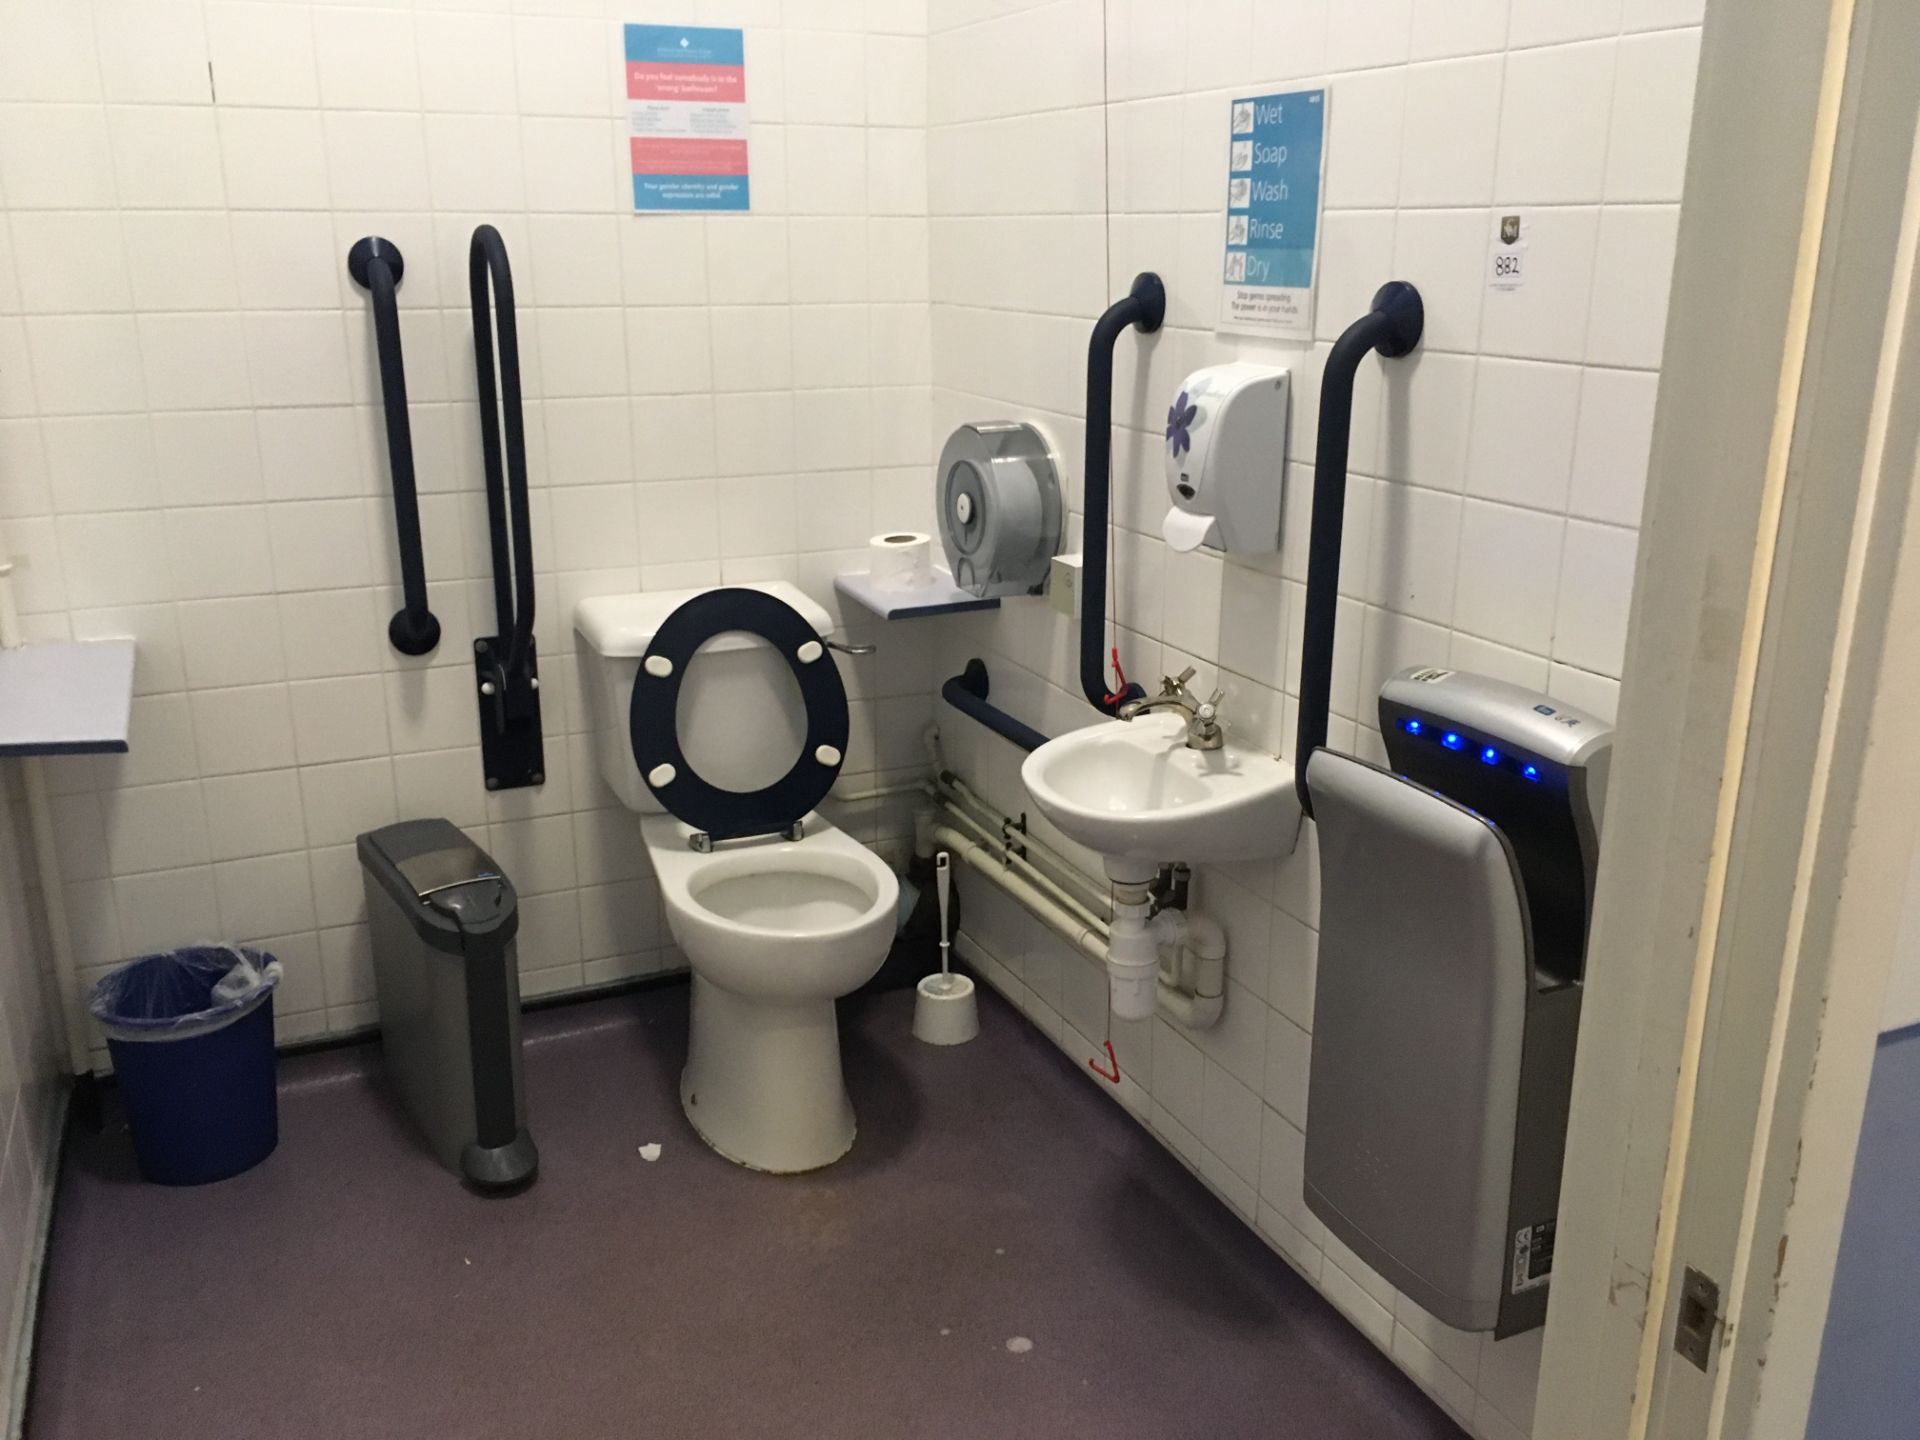 Contents of the disabled toilet, 1 x cubicle, hand drier, mirror, safety rails - Image 3 of 3